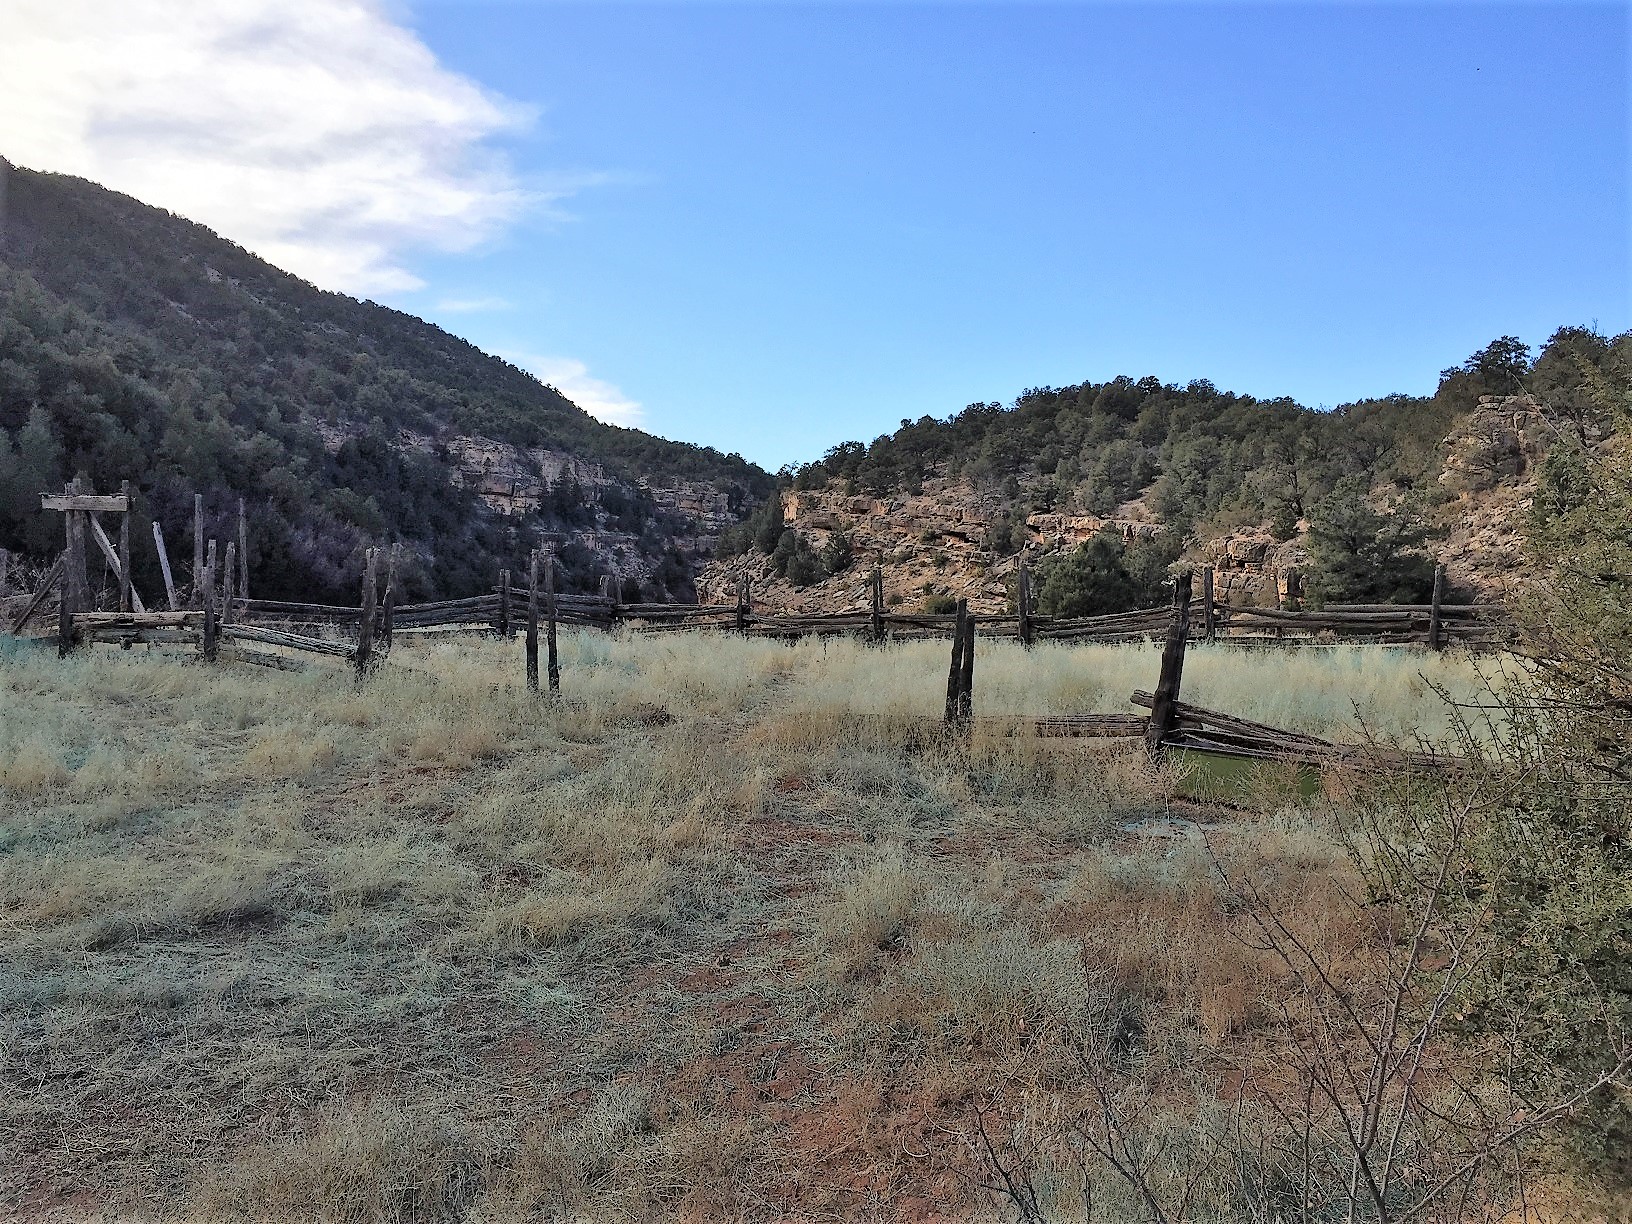 Corral at the junctions of Forest Service Roads 22 and 423